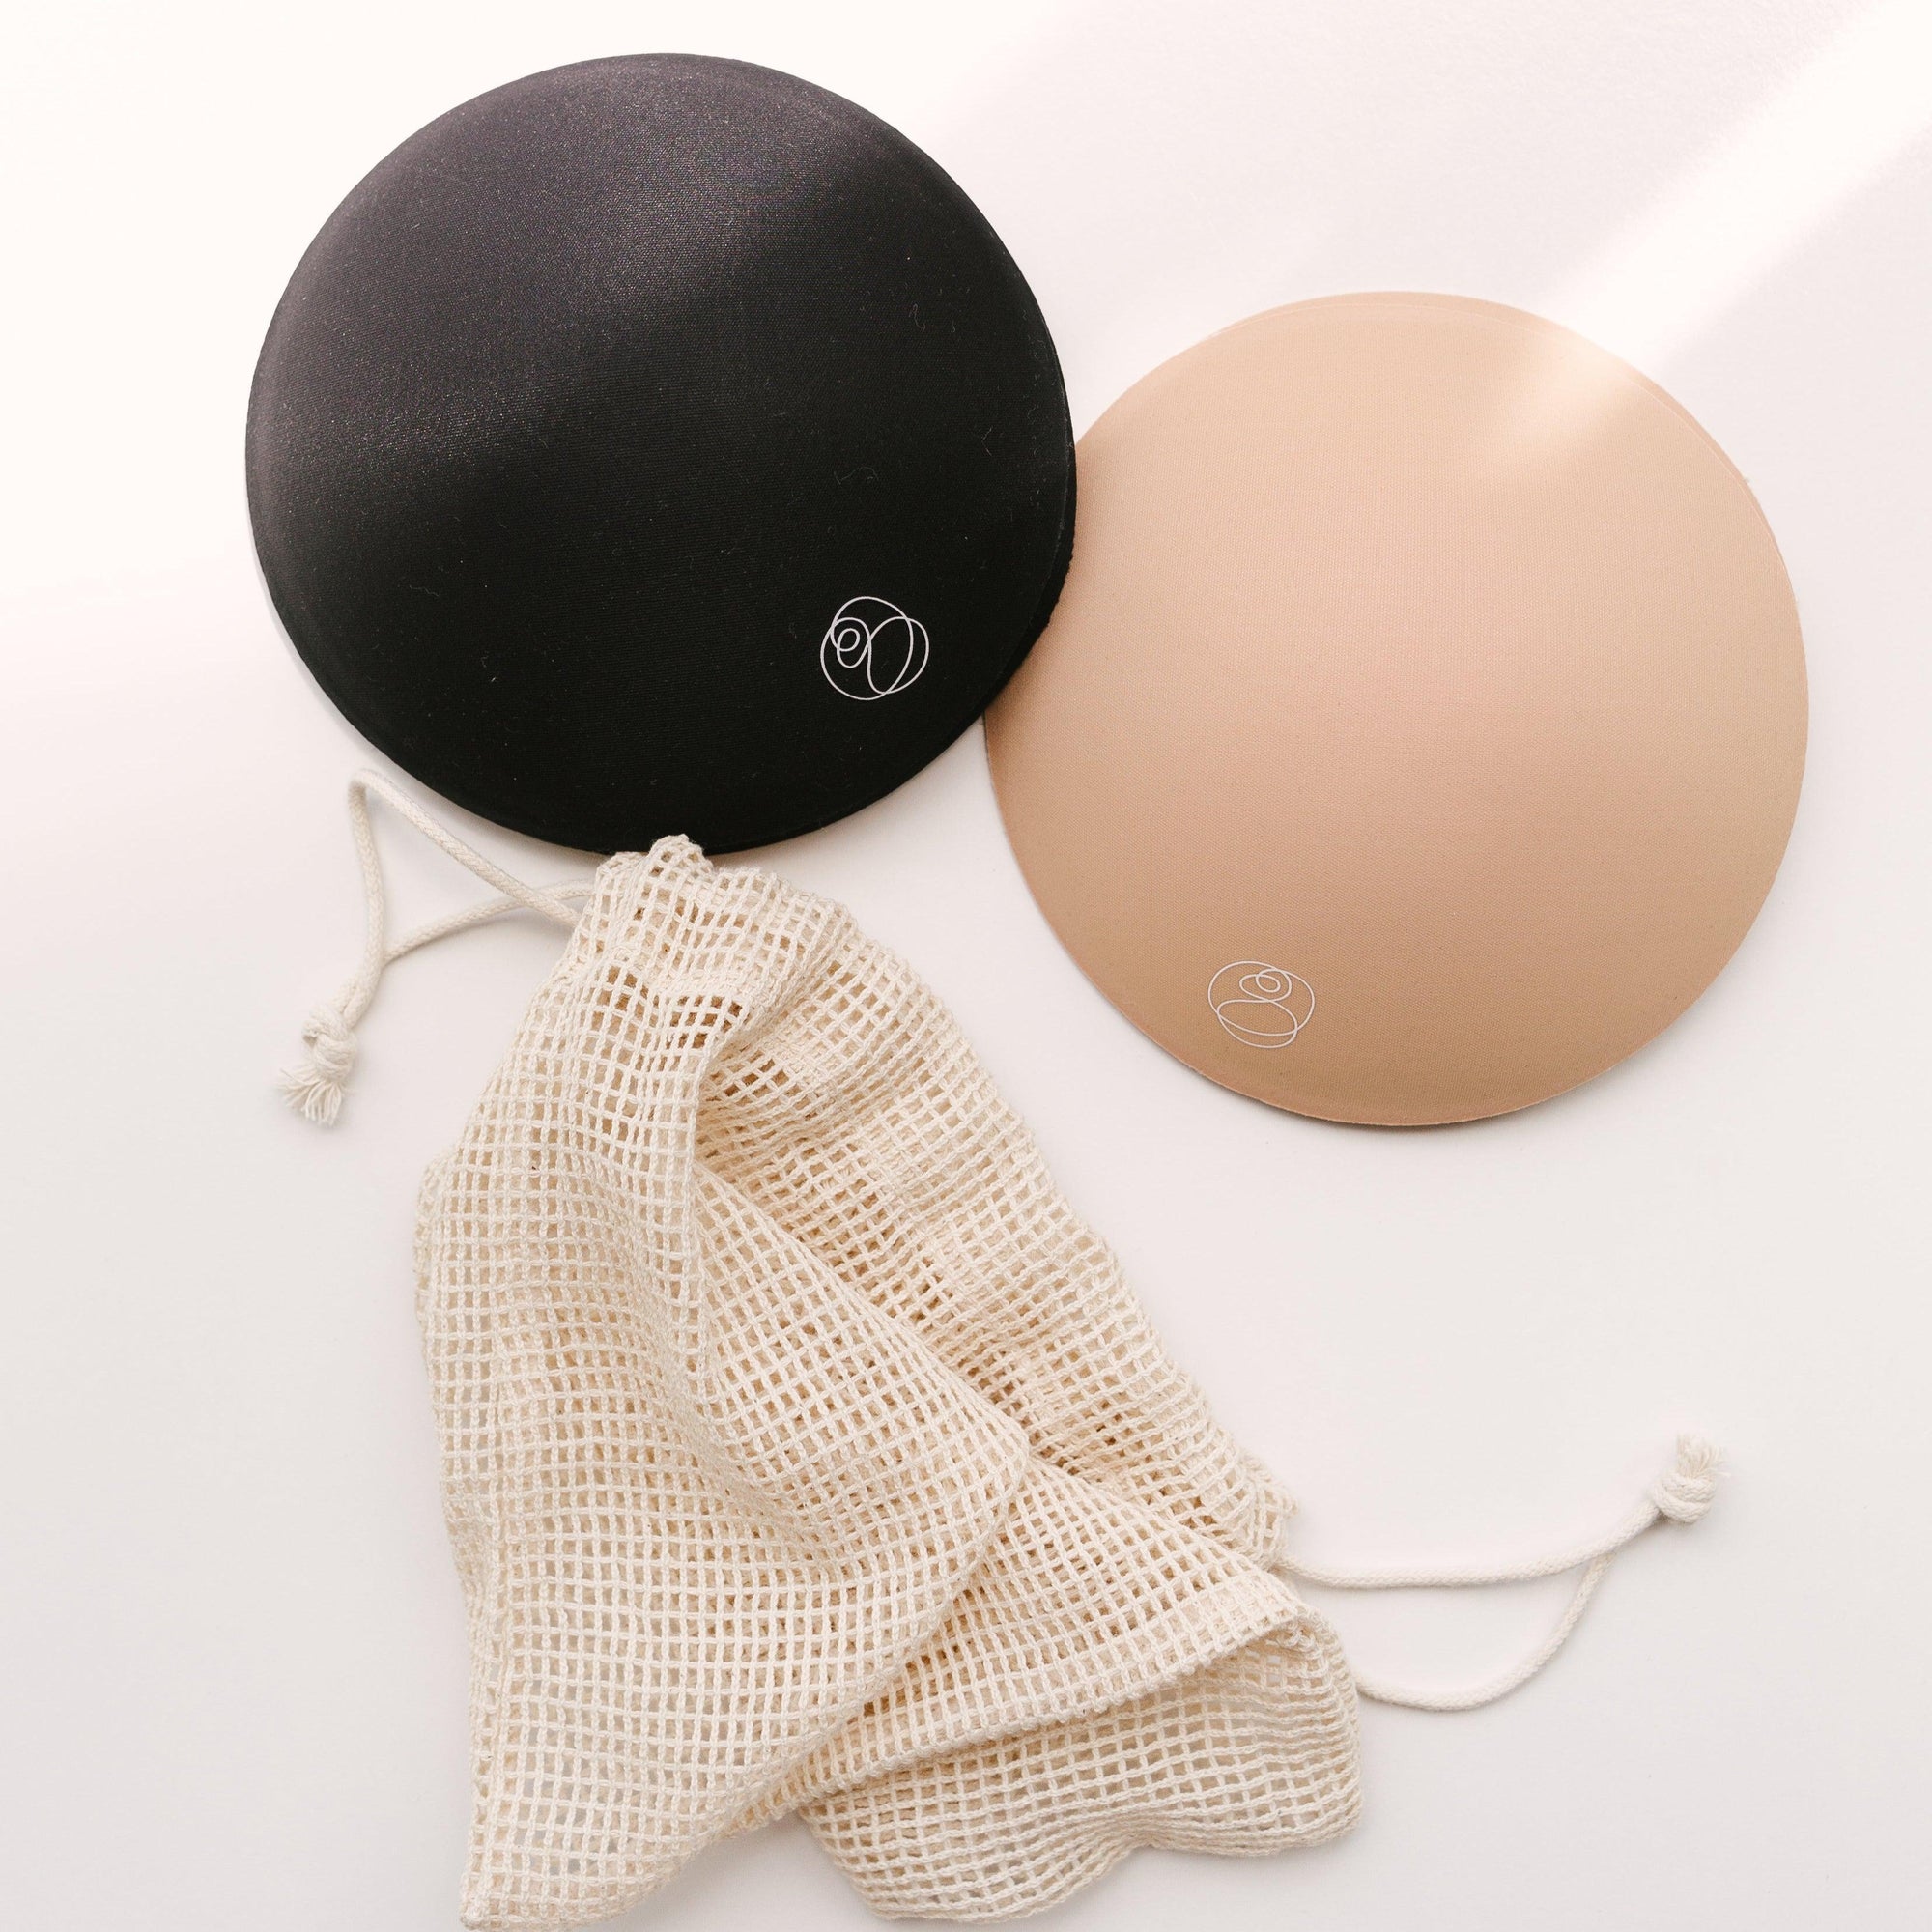 A pair of Bare Mum breast pads and a bag on a white surface.